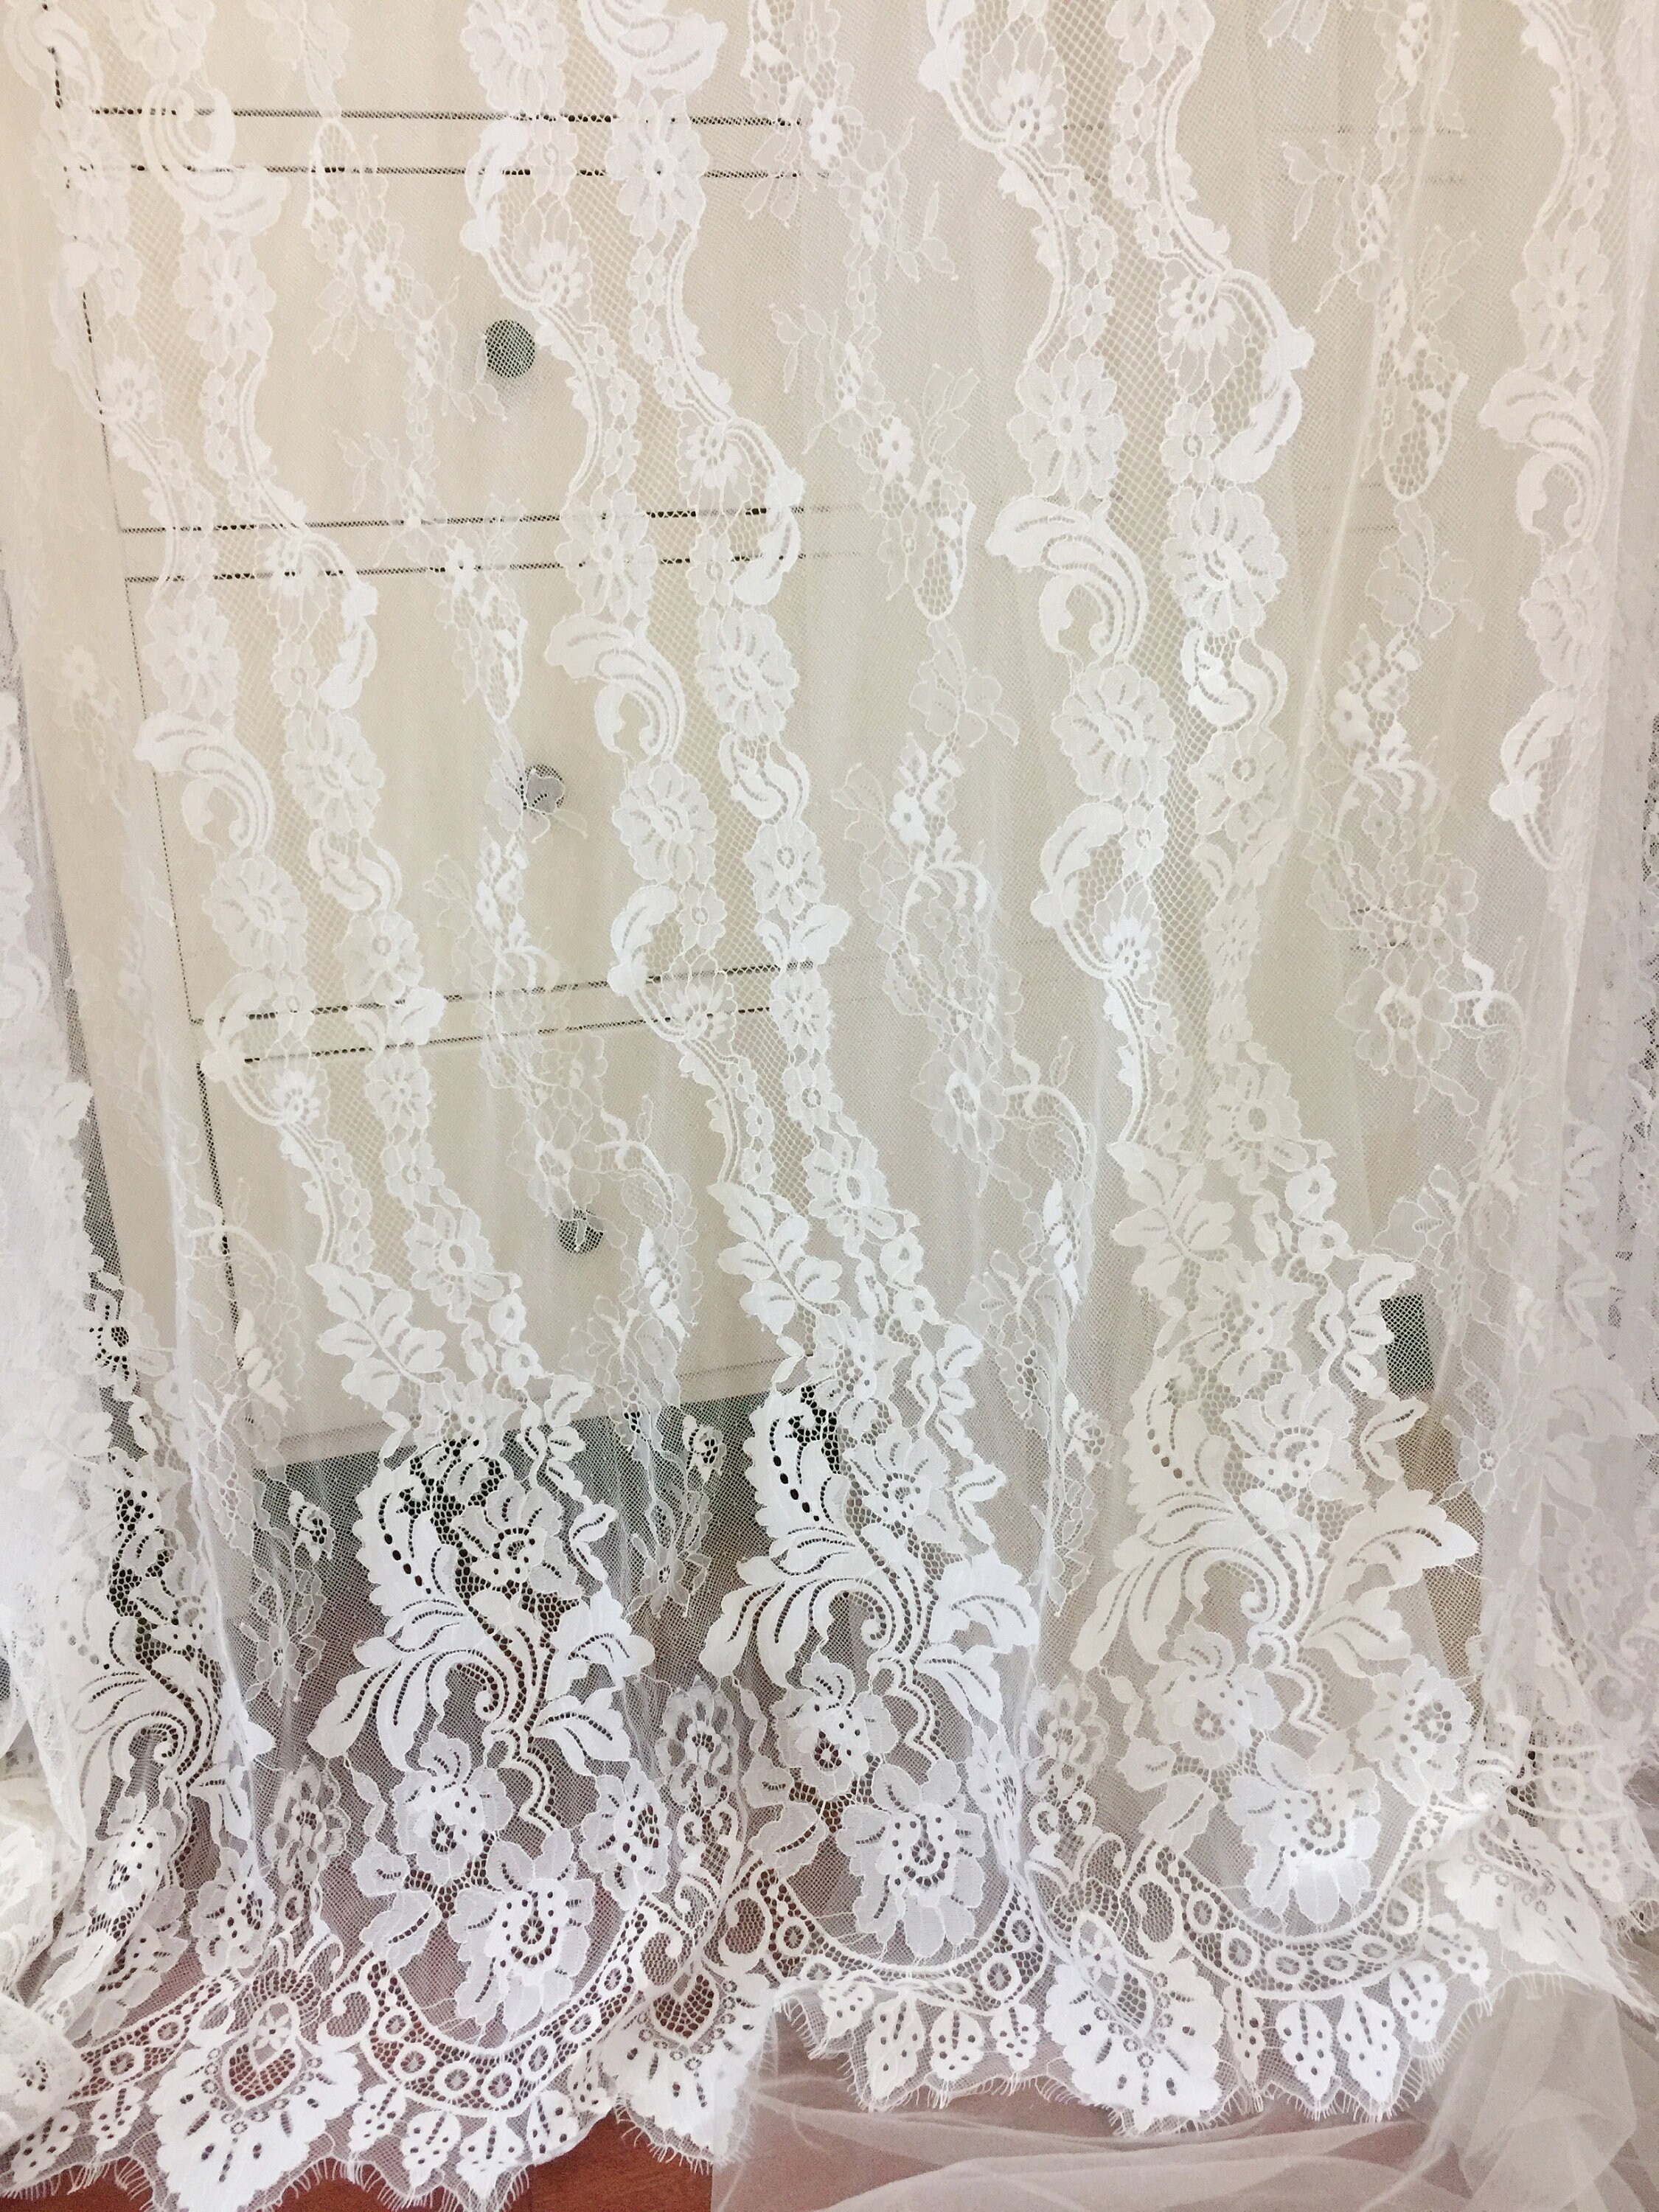 3 yards Top Quality Off White French Chantilly Lace Fabric | Etsy